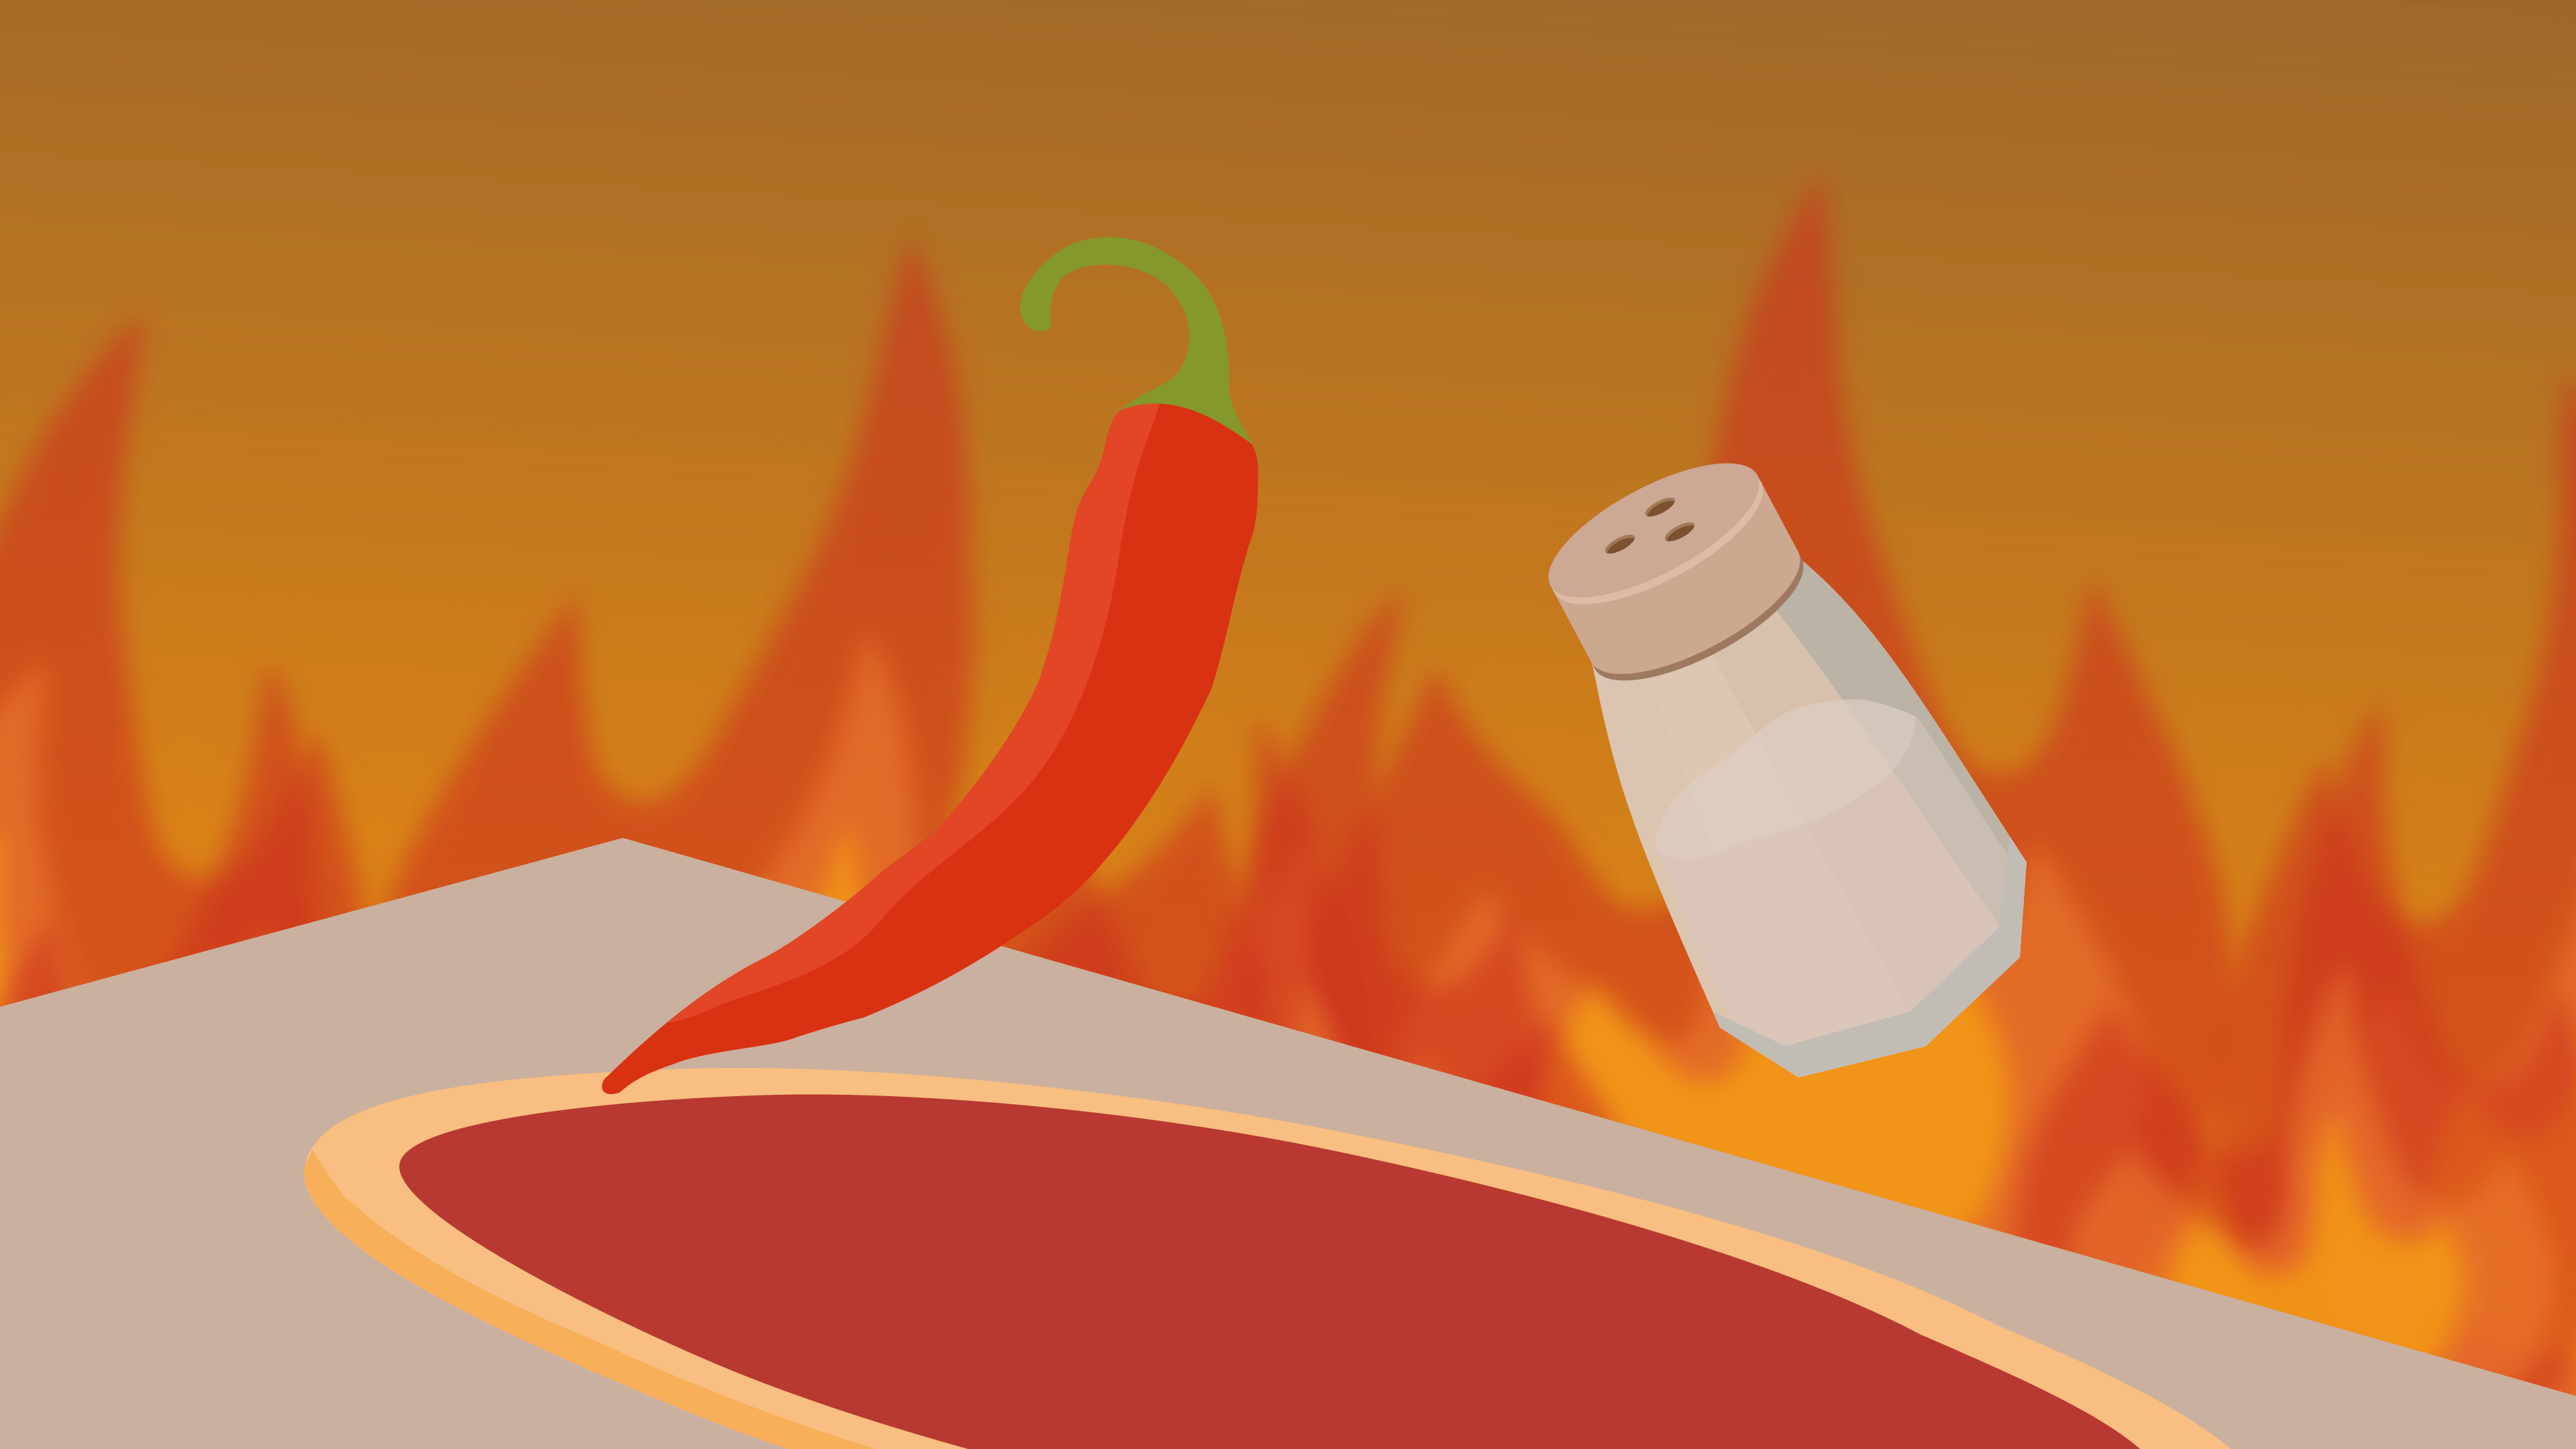 A red pepper and a salt shaker dancing above a pizza